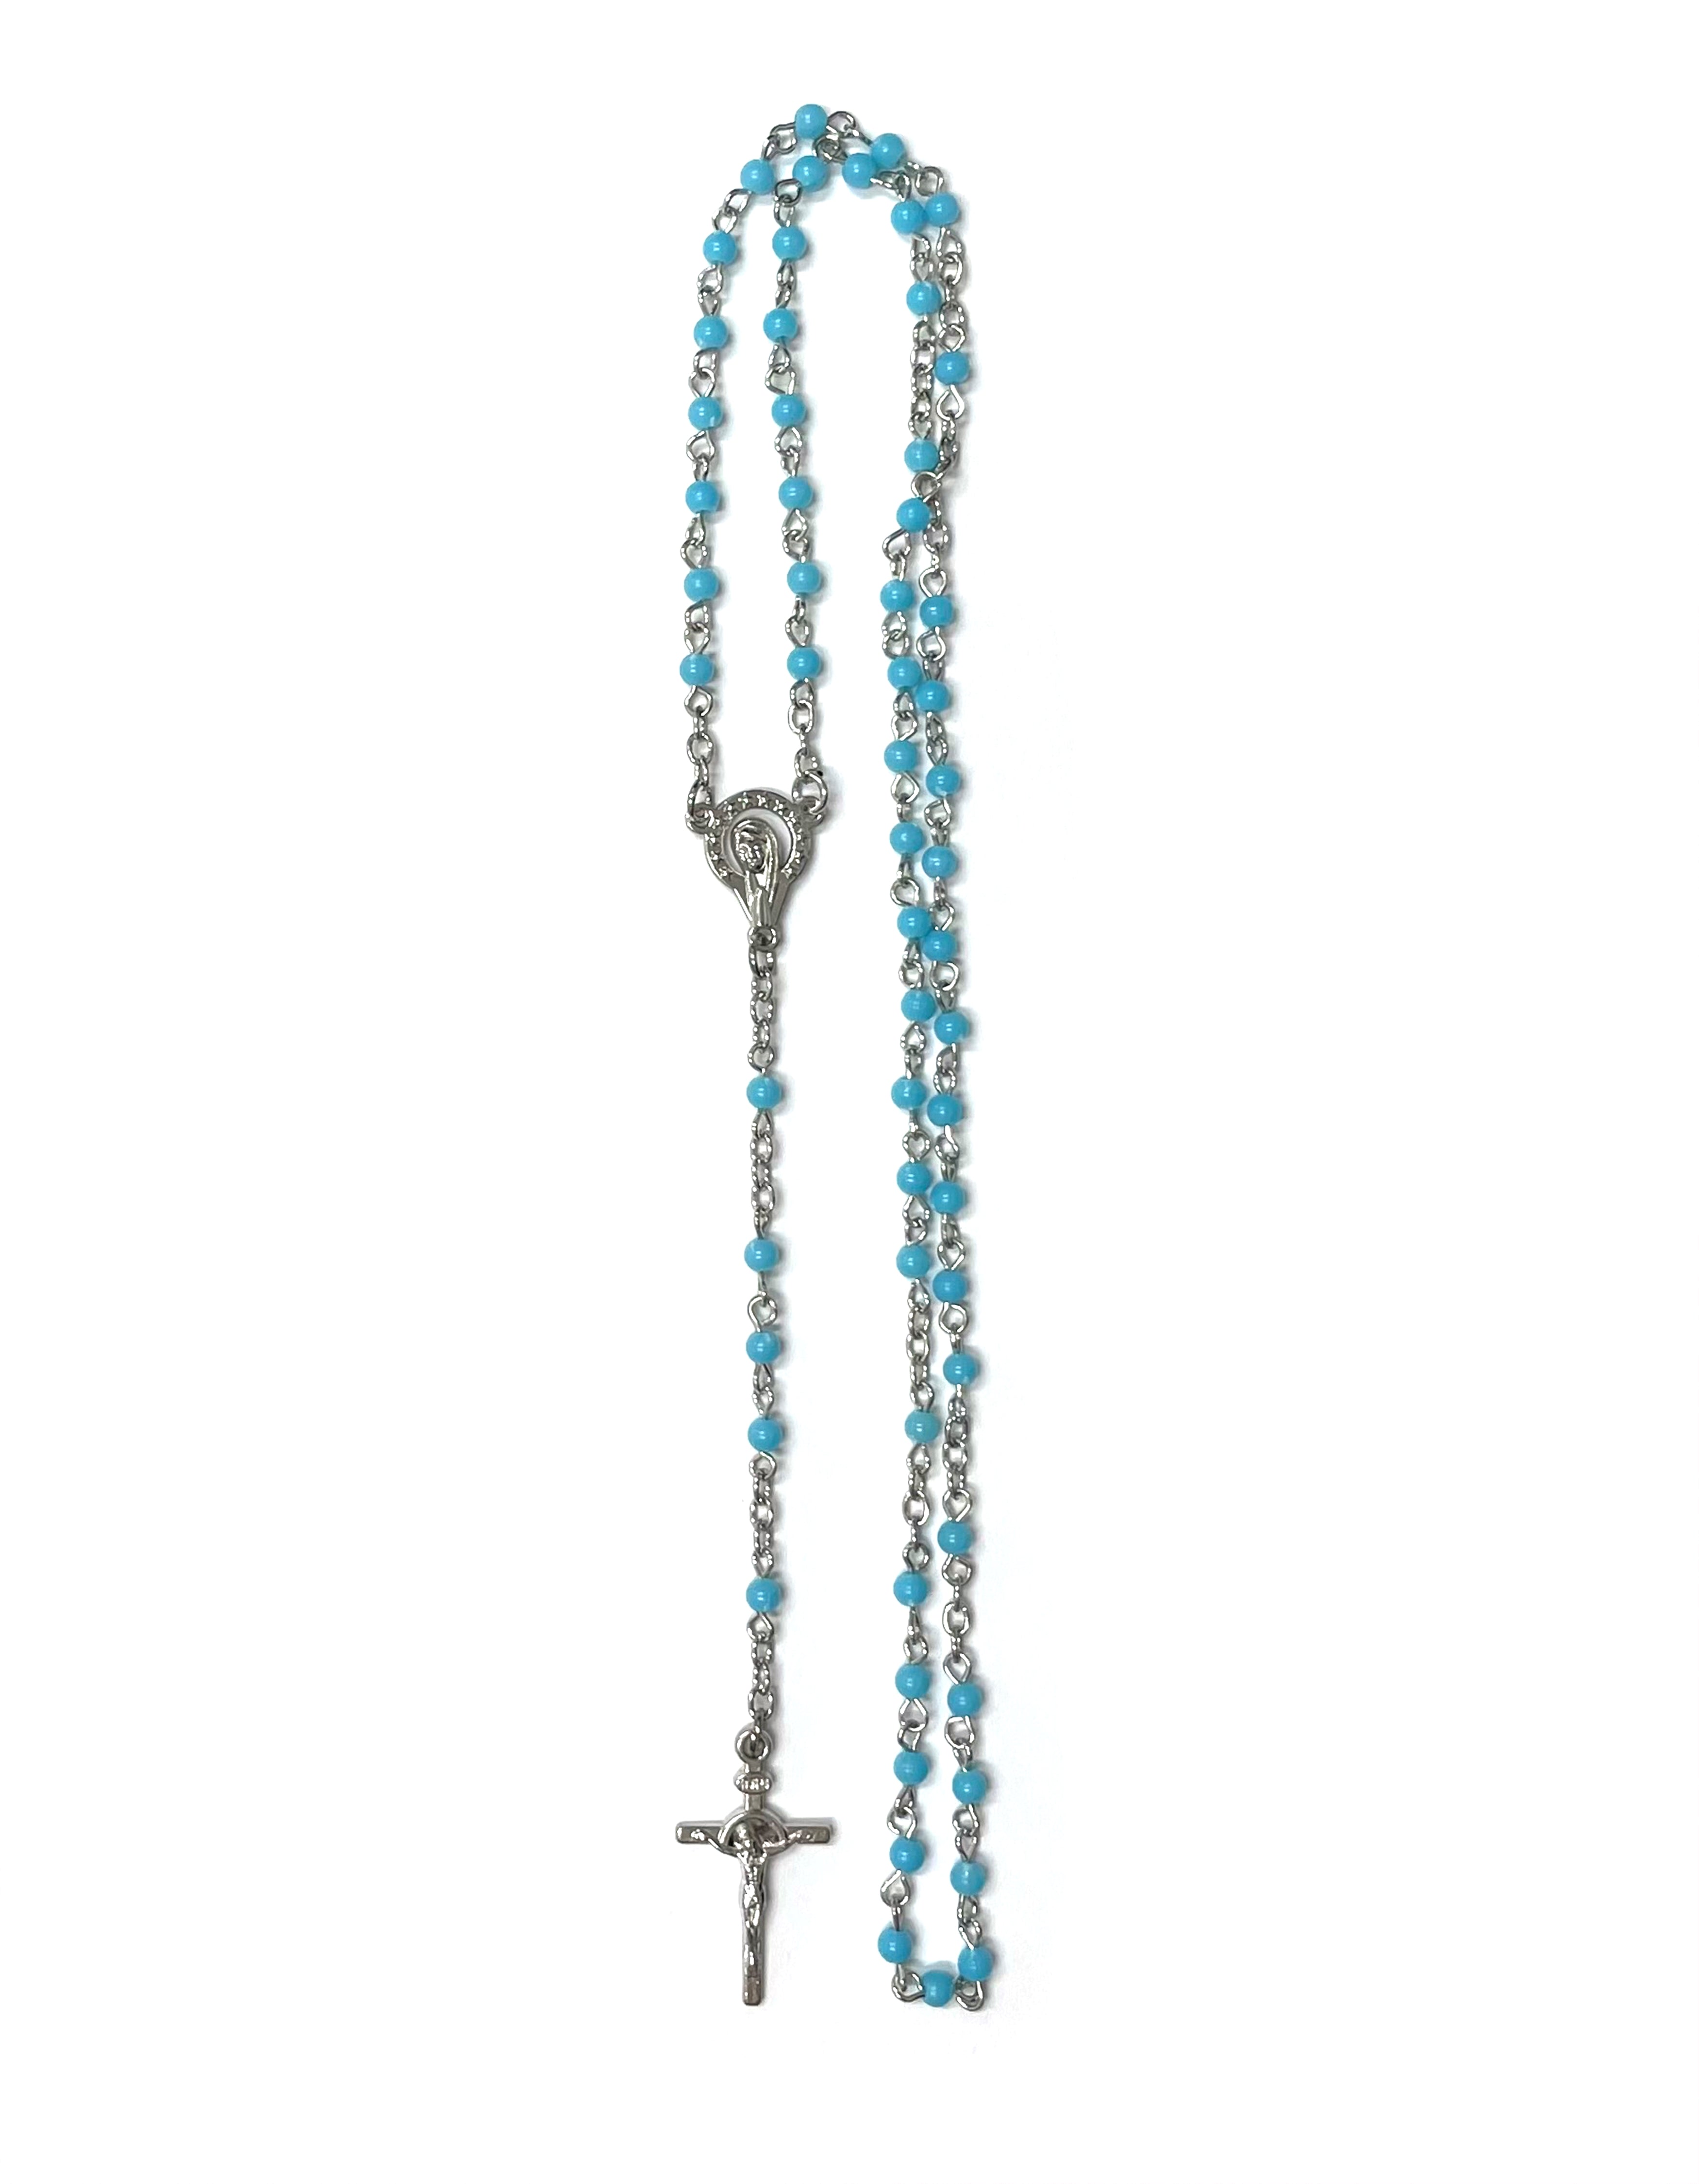 Silvered rosary with colorful plastic beads